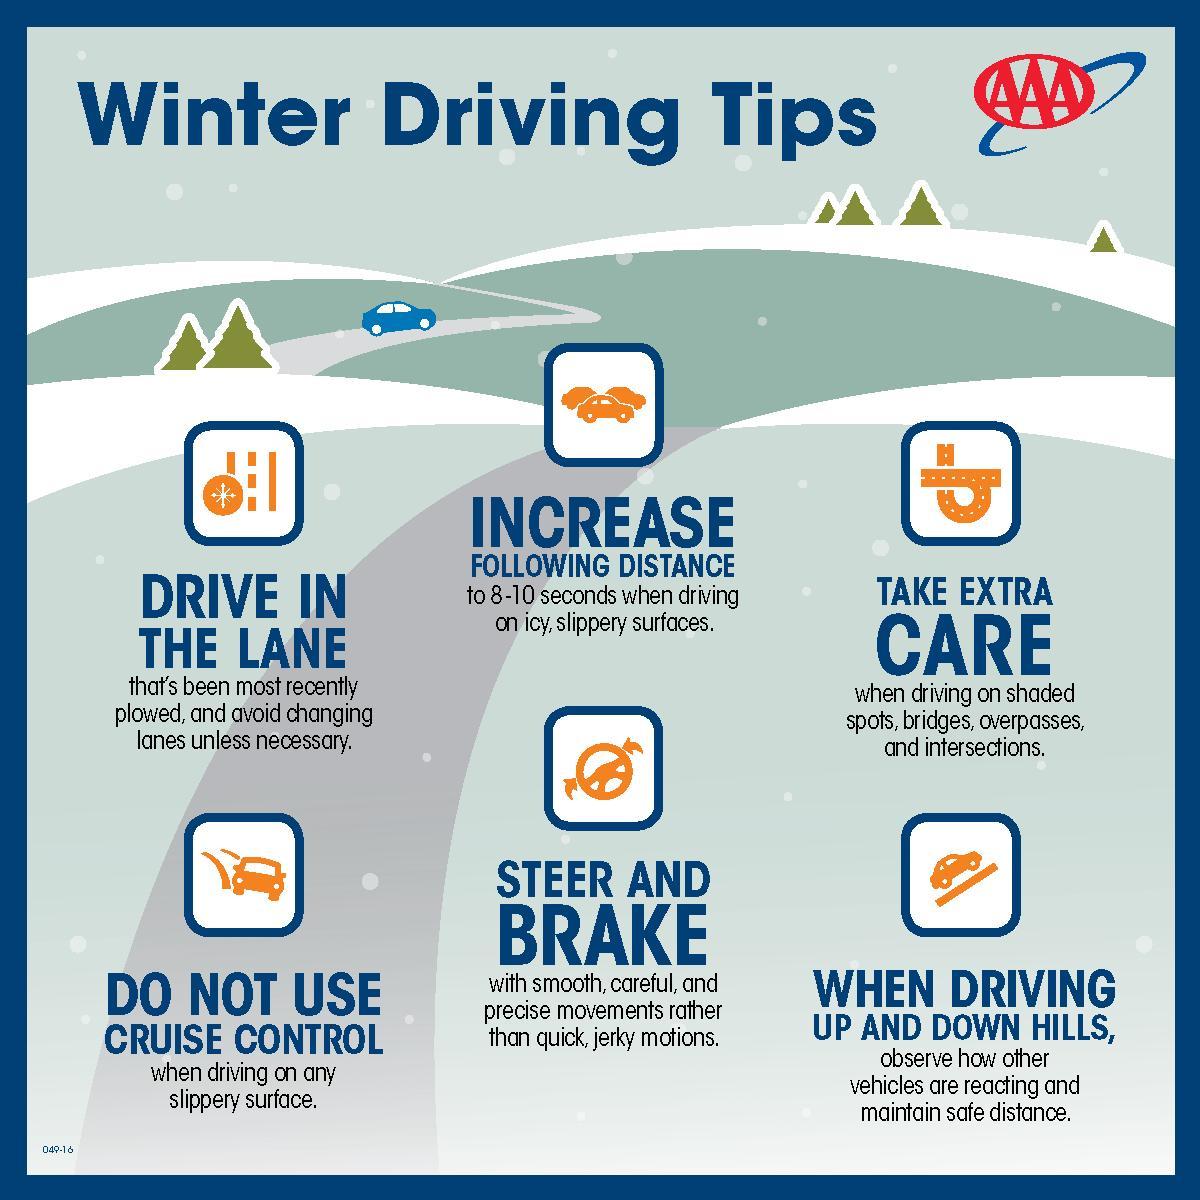 Wintery driving conditions will be upon us soon!! Be safe! ❄

#DriveSafeOhio #FCSafeComm